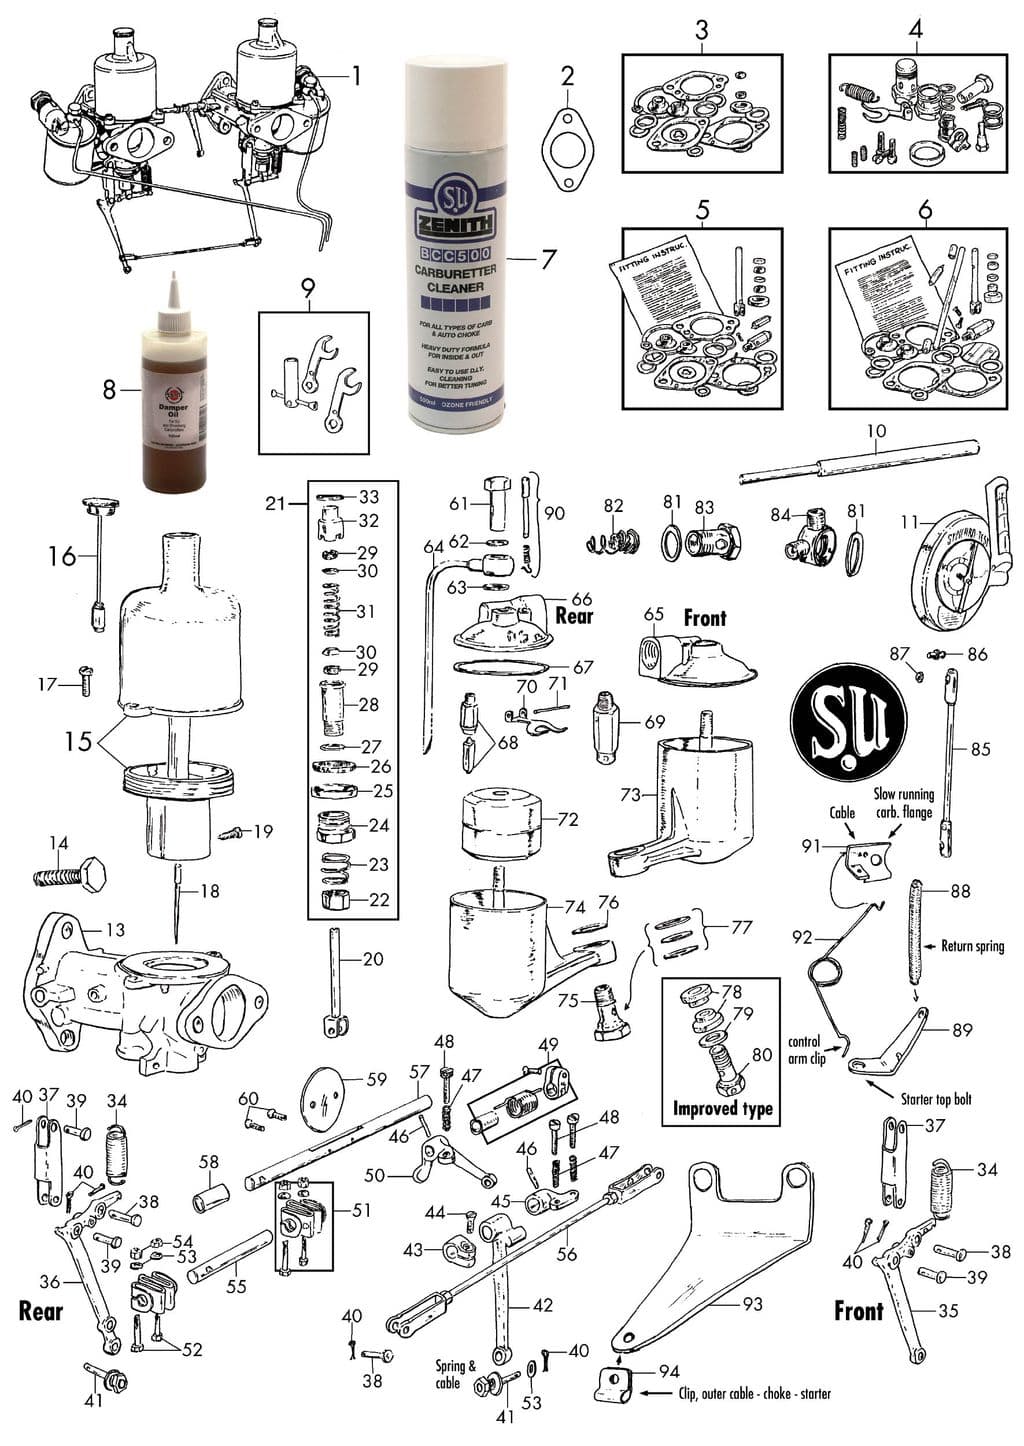 MGTC 1945-1949 - Arricchitori/ starter | Webshop Anglo Parts - 1